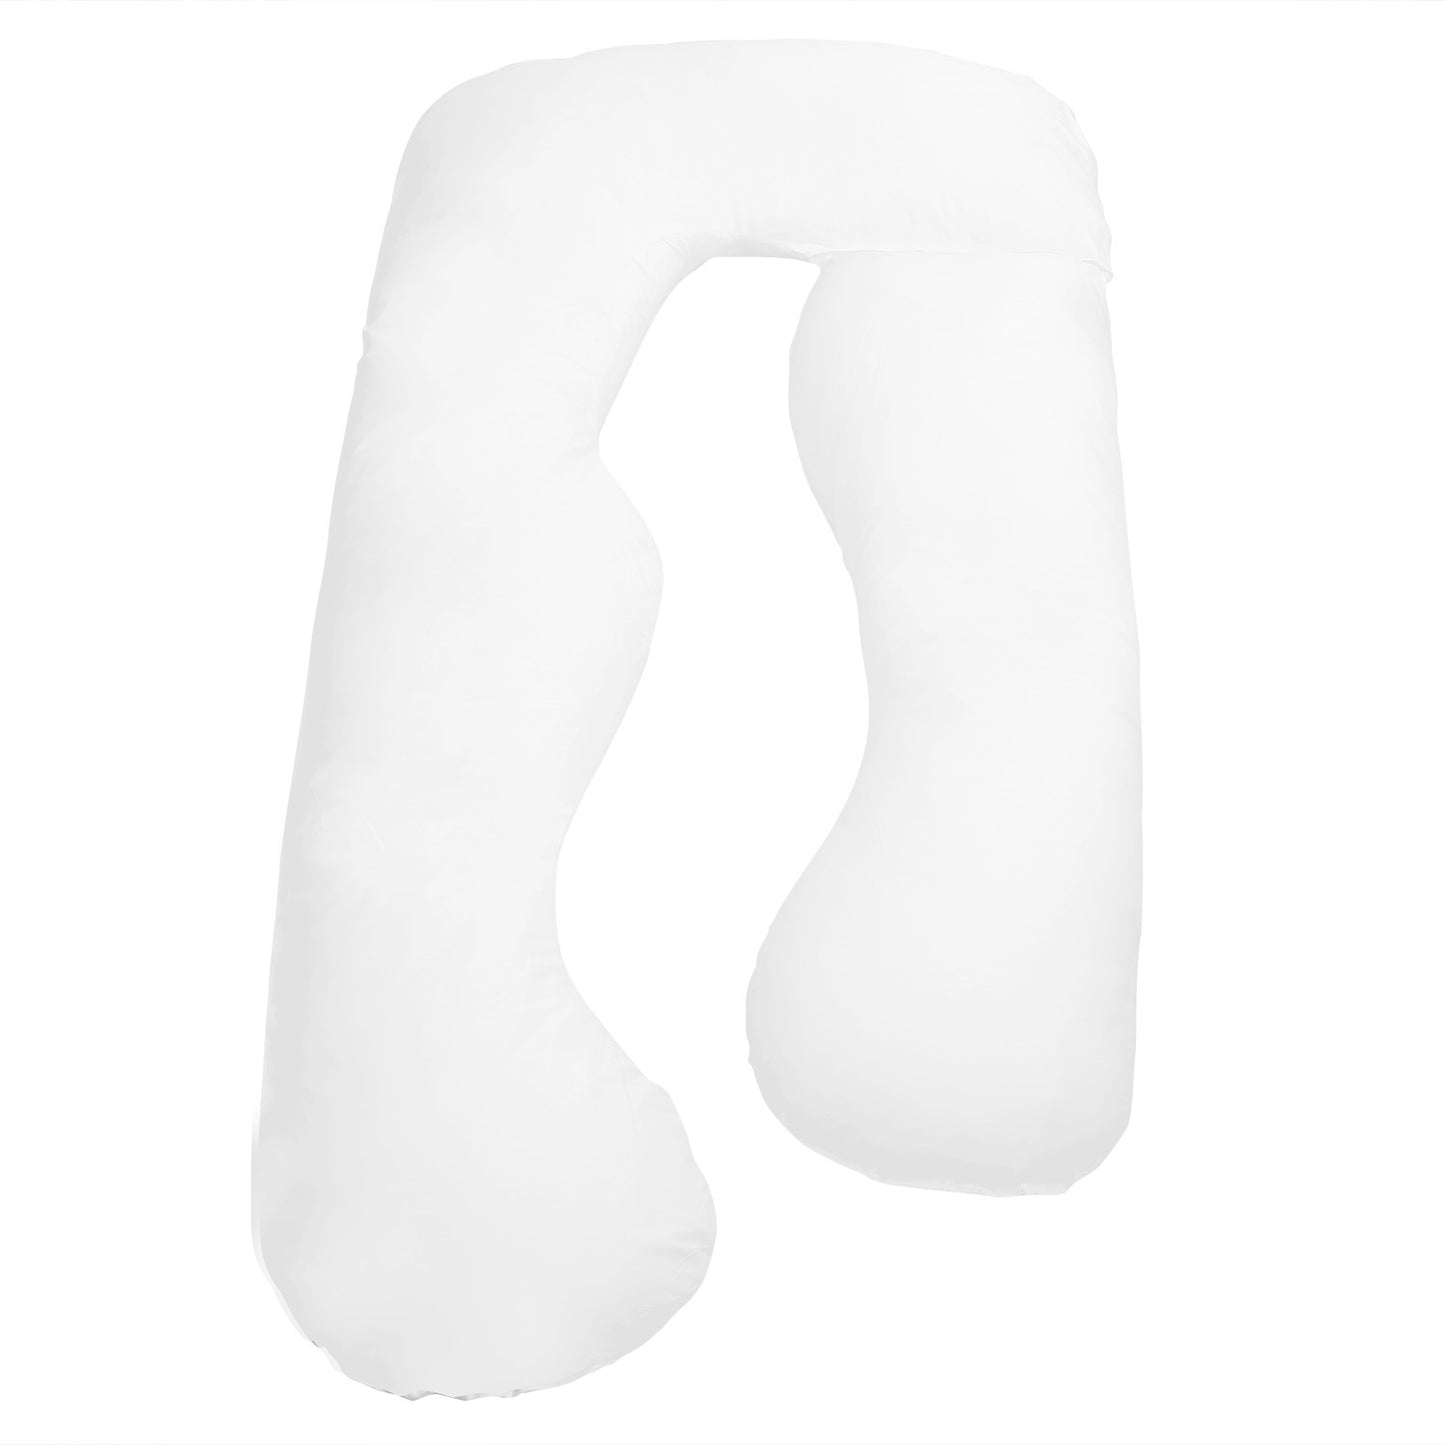 Pregnancy U Shaped Maternity Pillow Full Body Maternity Belly Comfort Pillow